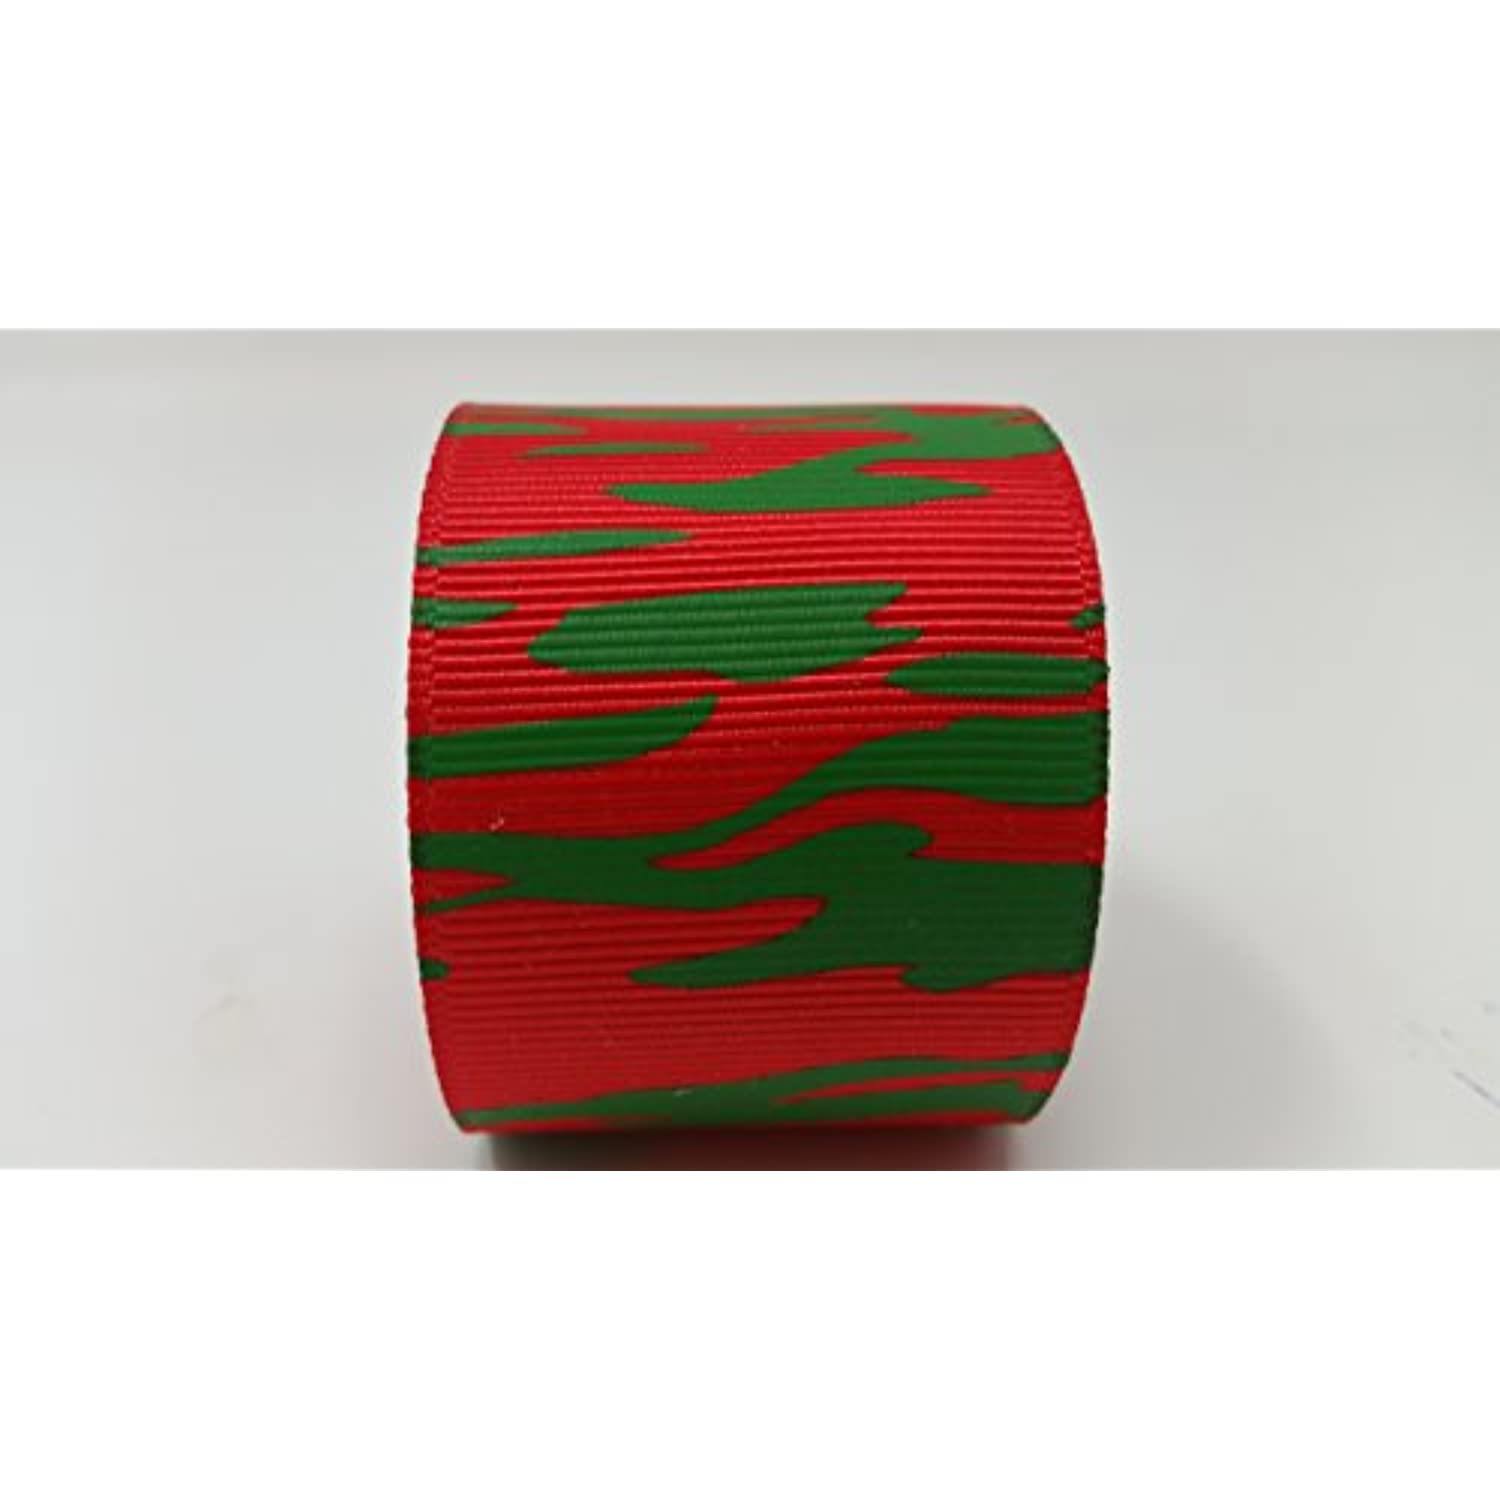 Polyester Grosgrain Ribbon for Decorations, Hairbows & Gift Wrap by Yame Home (1 1/2-in by 50-yds, 00031721 - green tiger stripes w/red background)